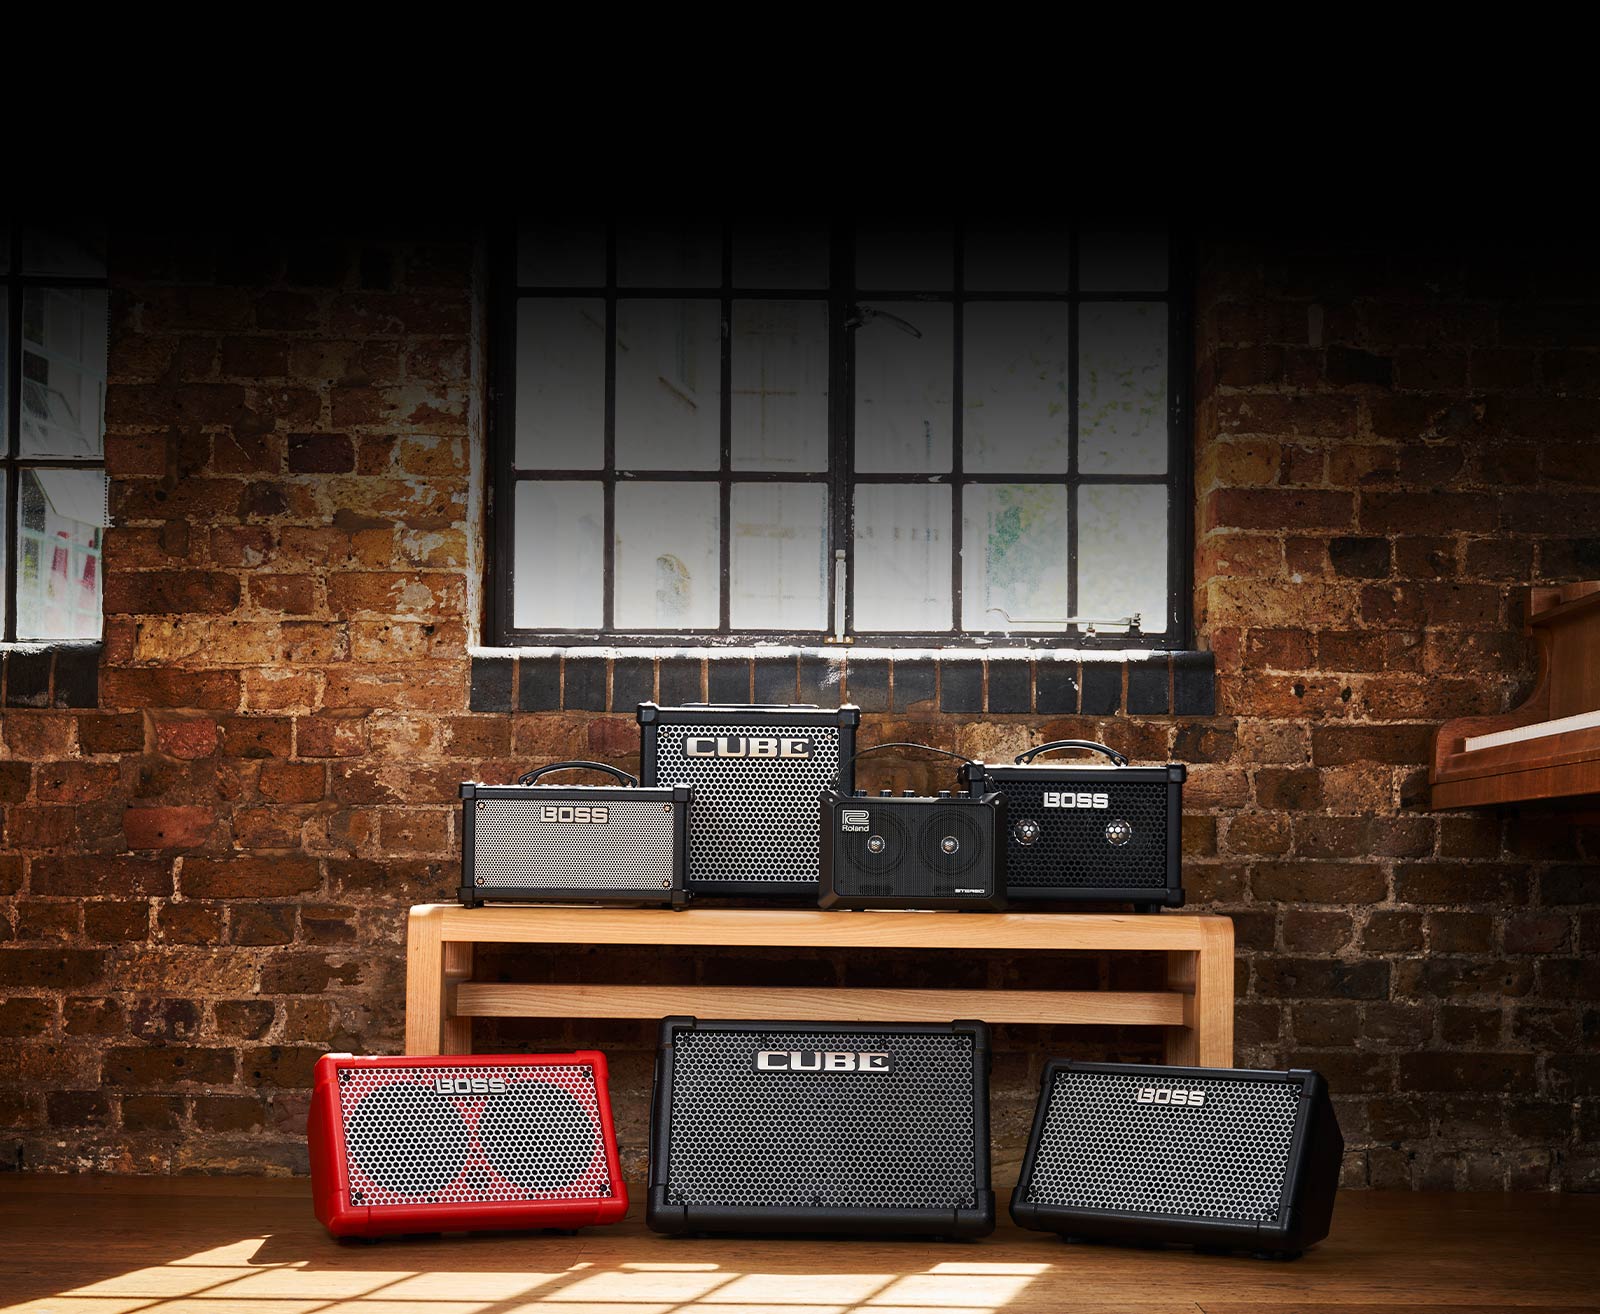 CUBE Series Amplifiers